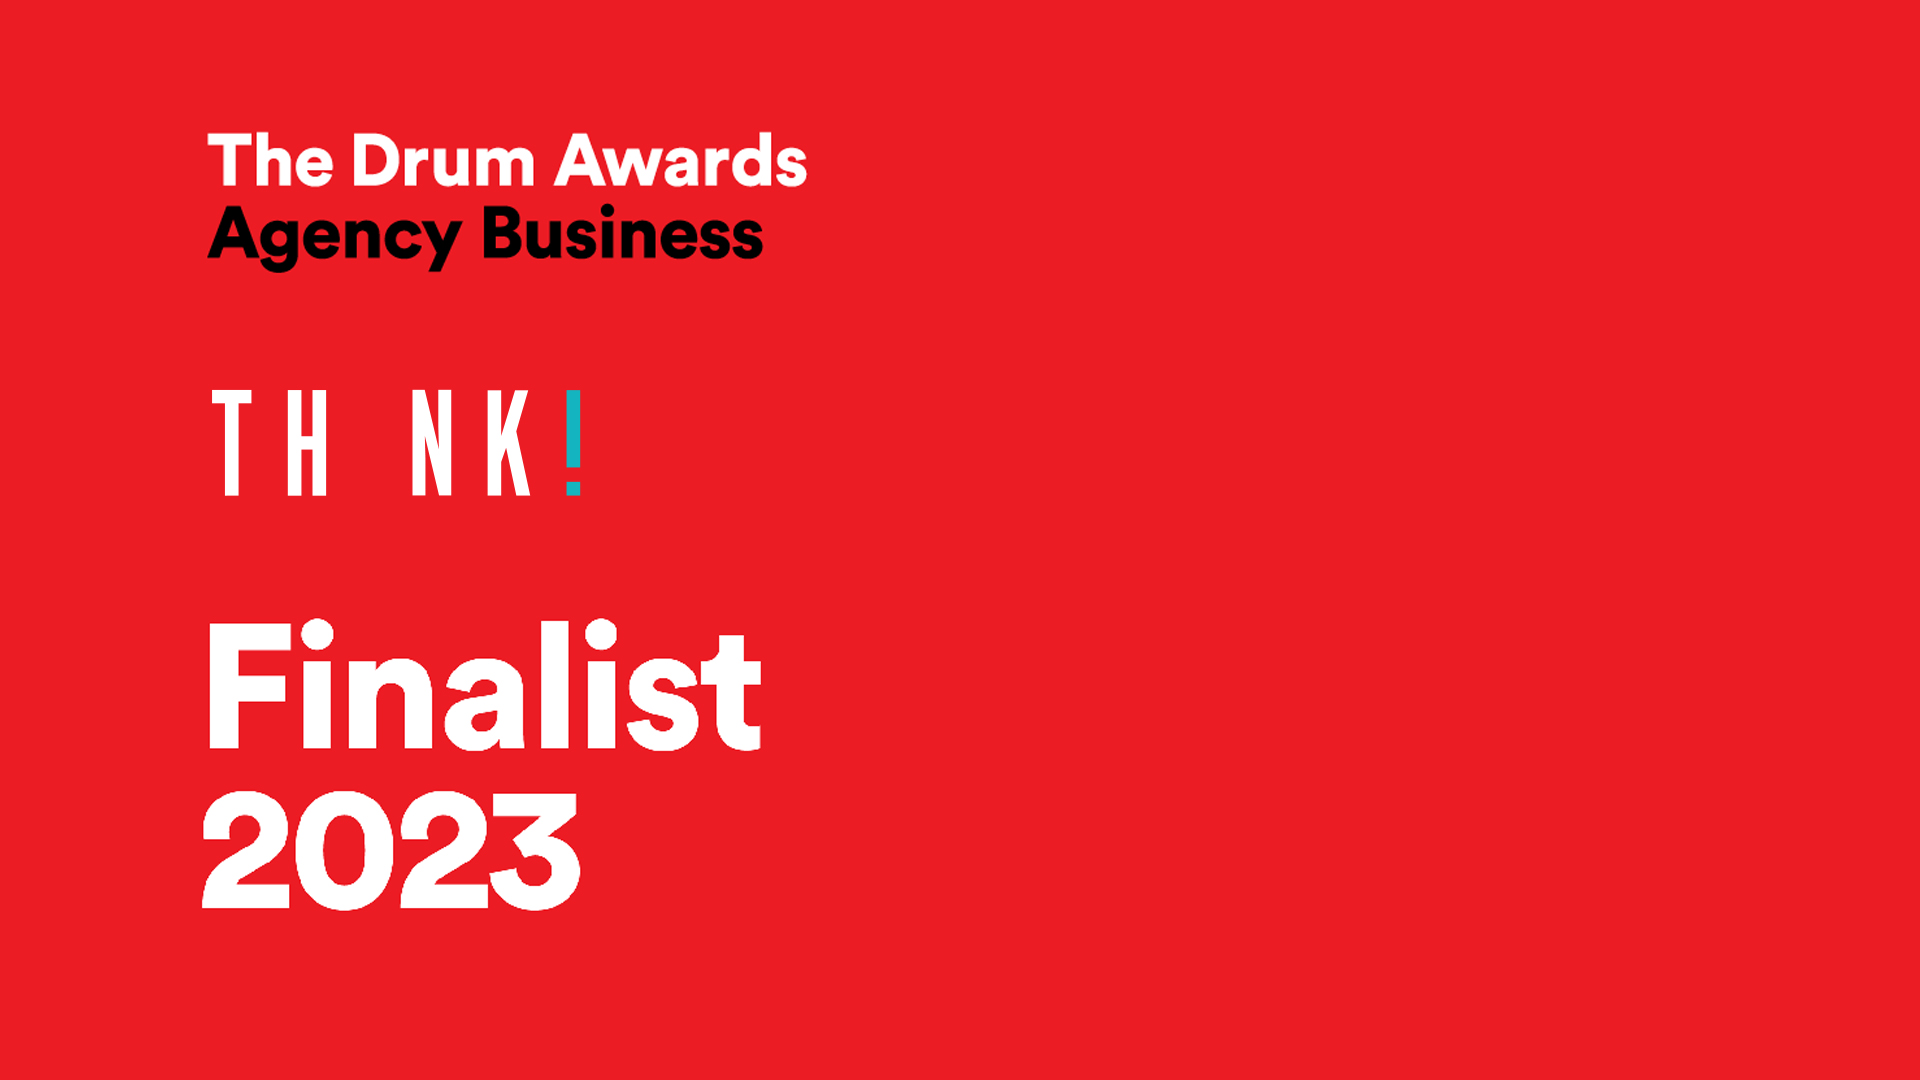 Think nominated - The Drum Awards Finalists feature